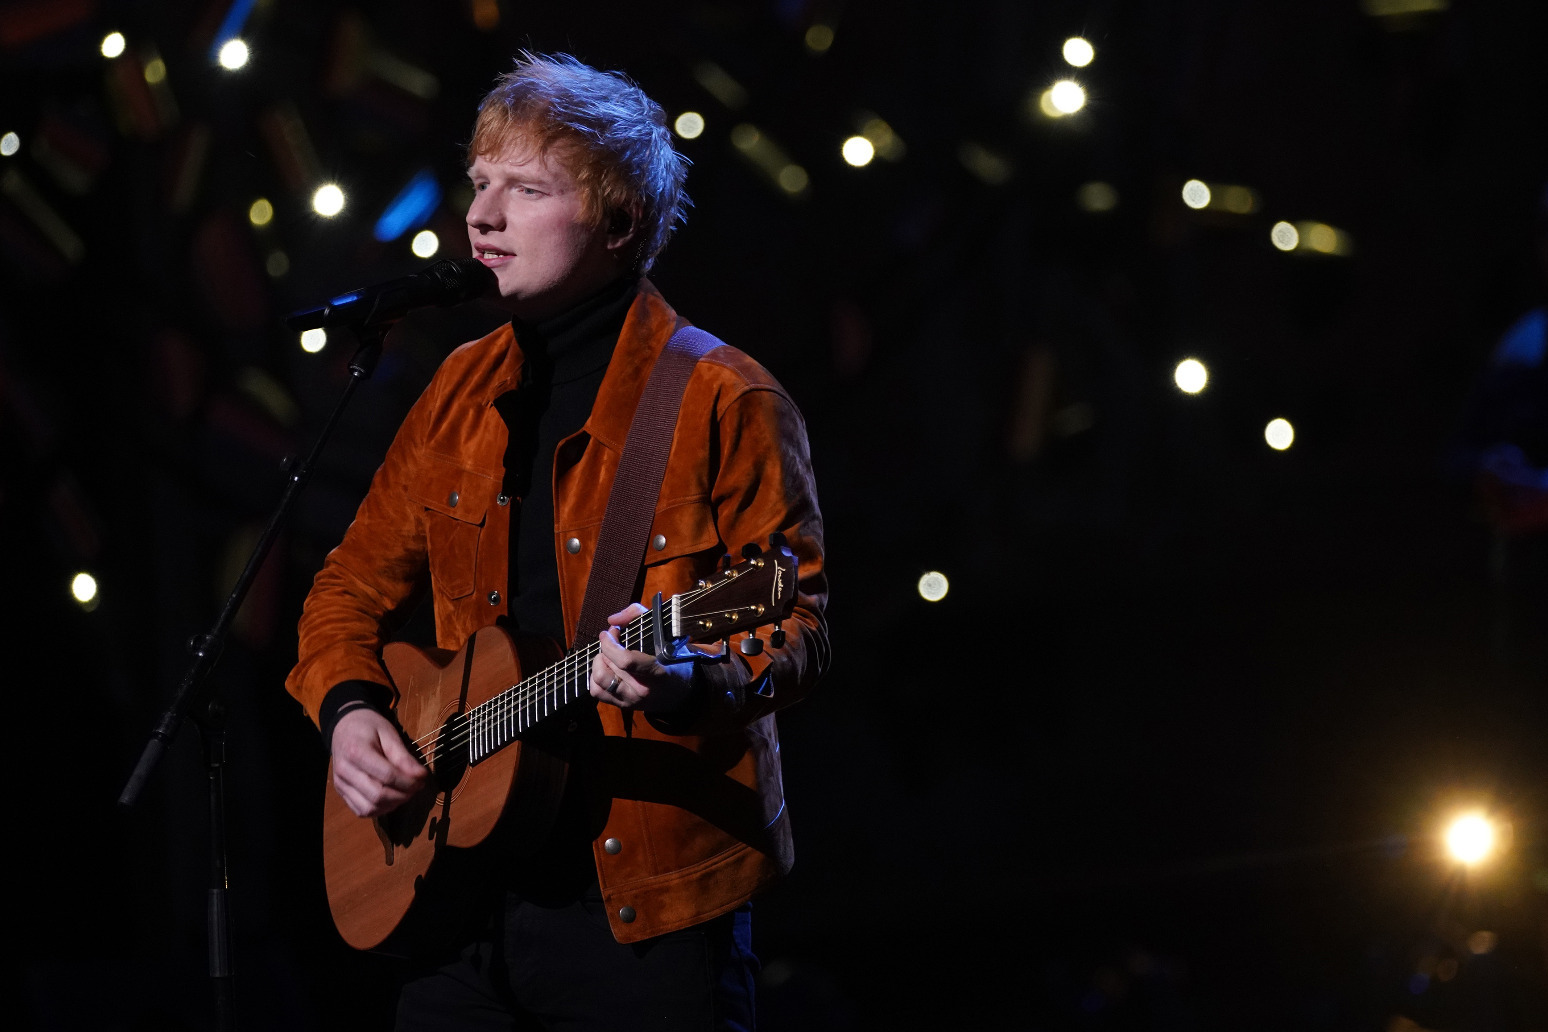 Ed Sheeran retains top spot in rich list of stars under the age of 30 